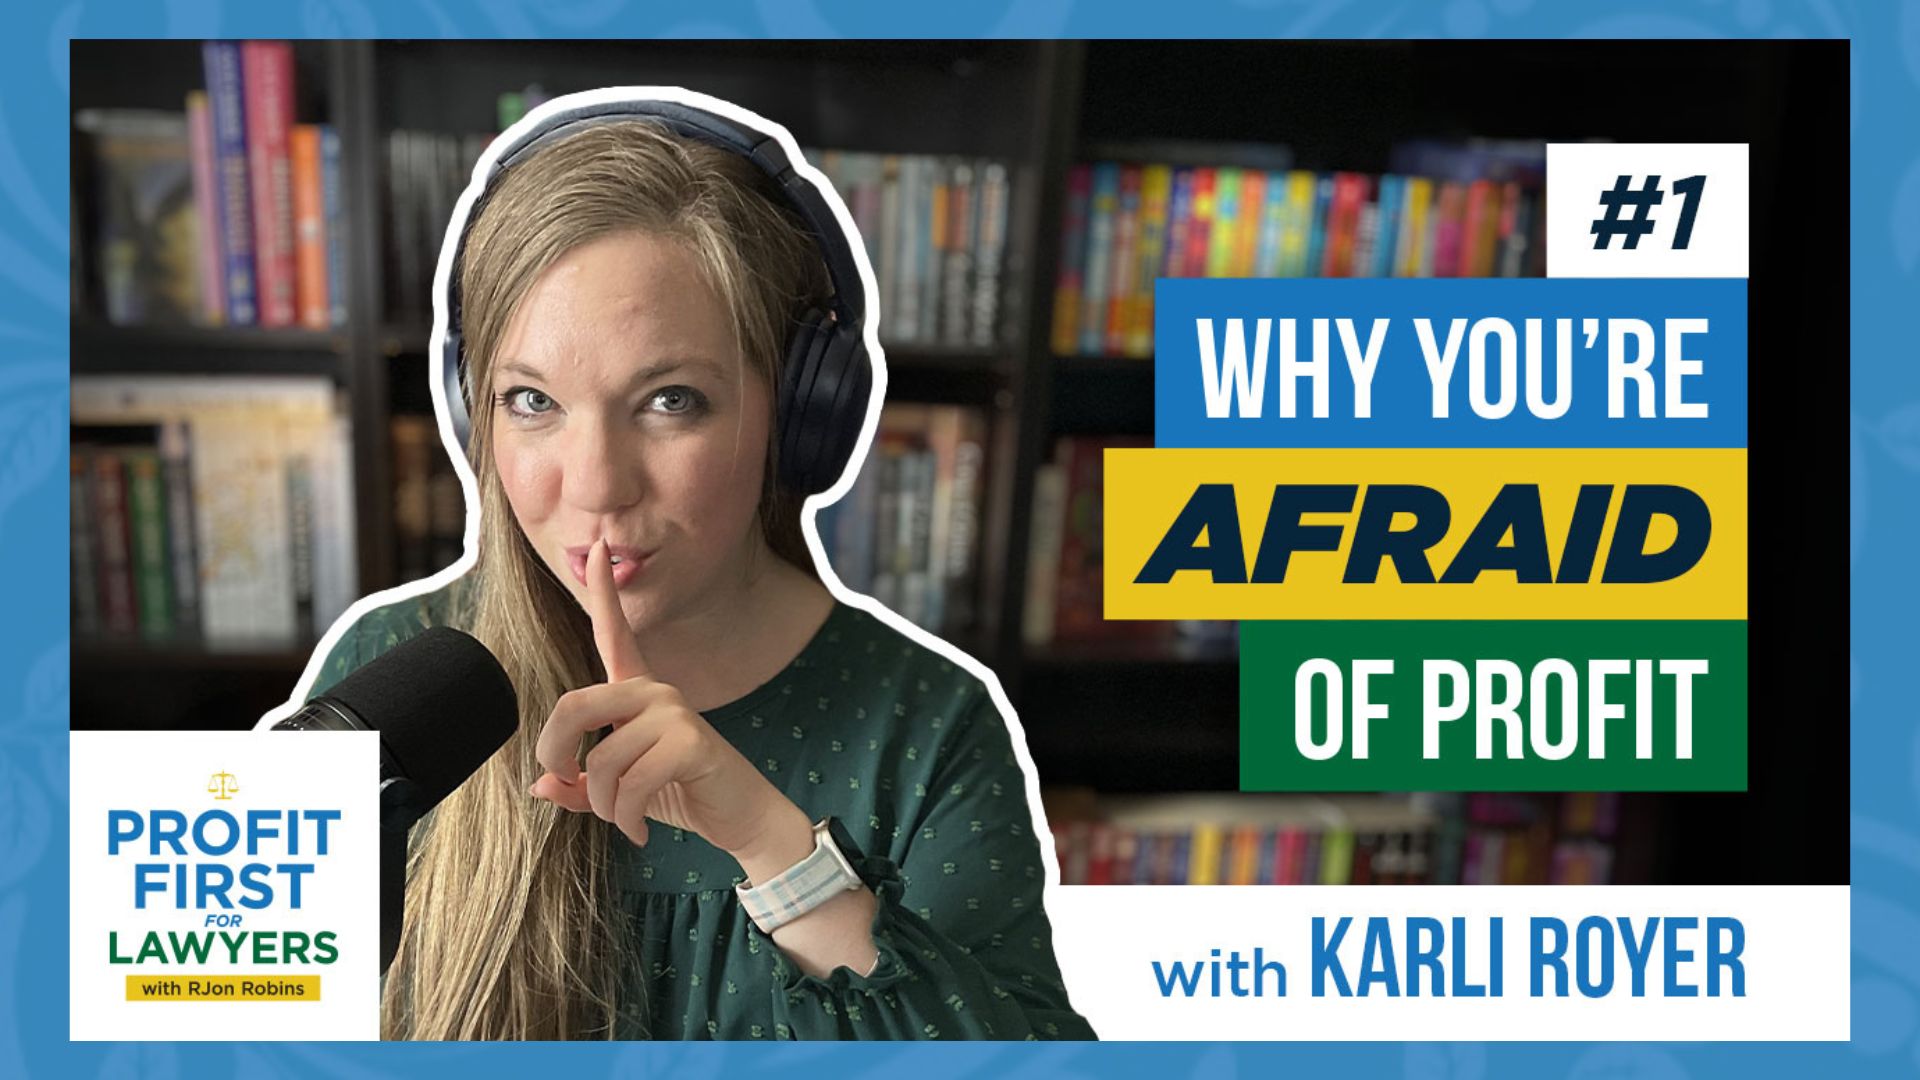 Karli Royer, host of Profit First For Lawyers podcast for episode one, "Why are you afraid of profit?"